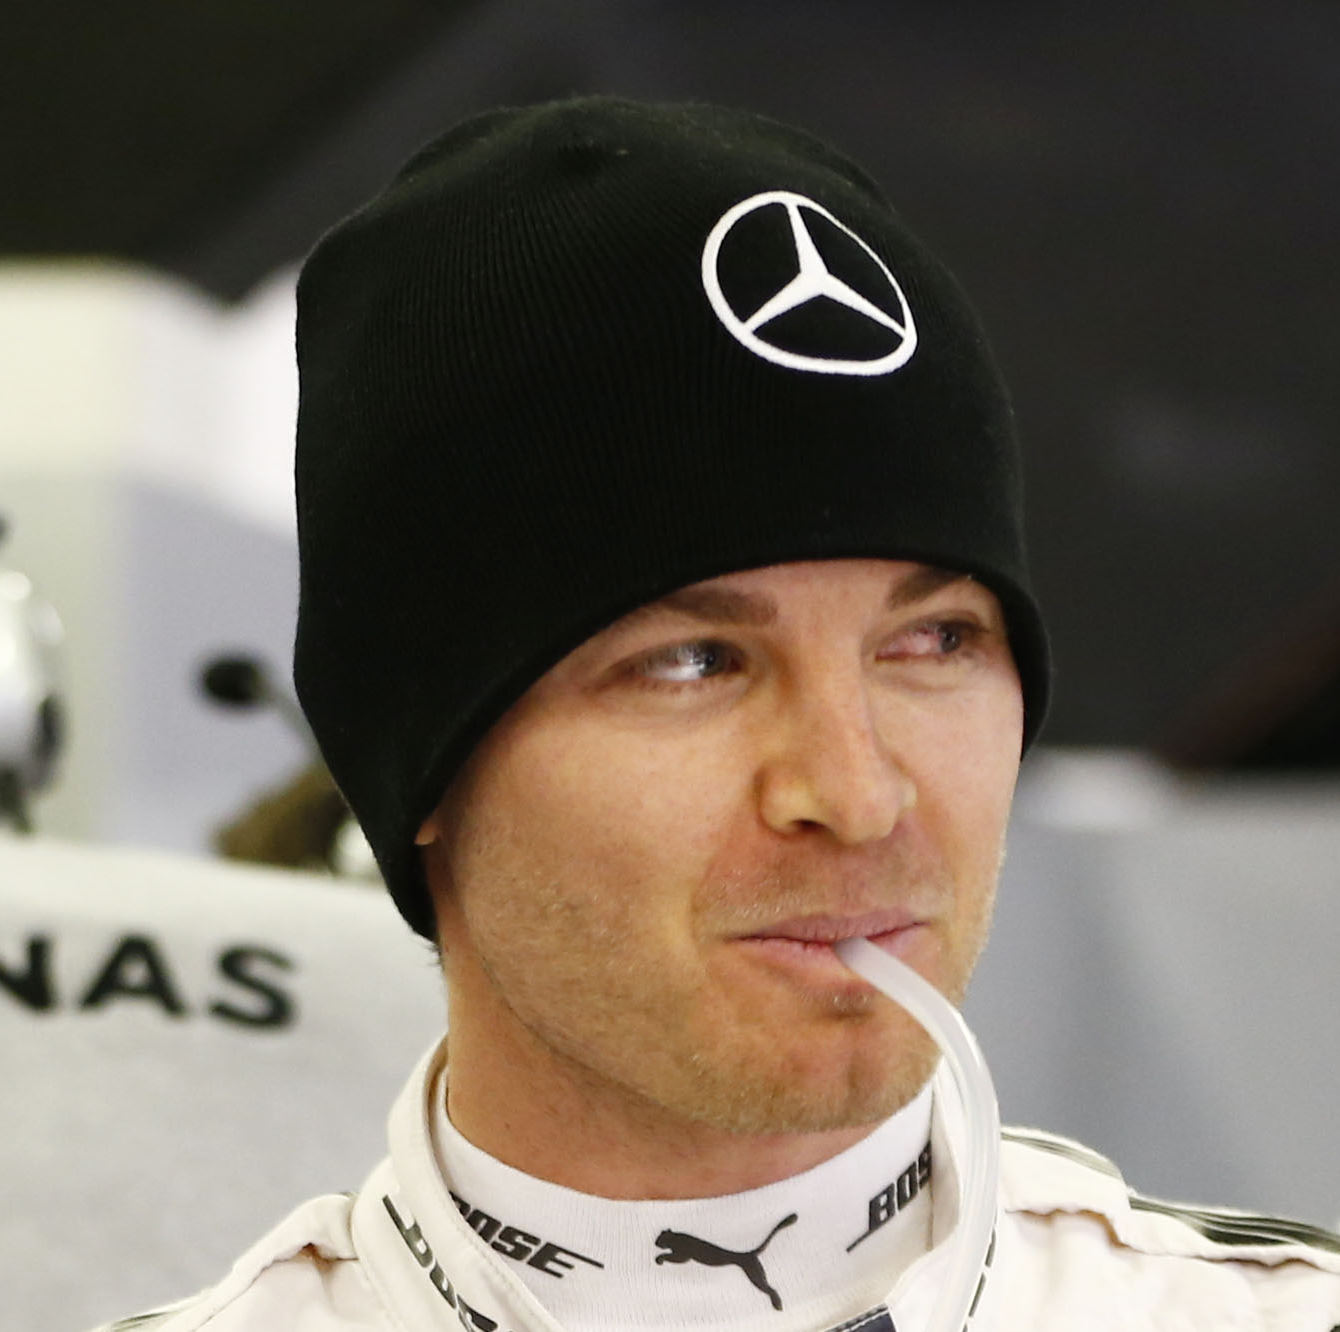 Rosberg knows no one is going to touch Mercedes, but he is saying Ferrari will be competitive so fans buy tickets